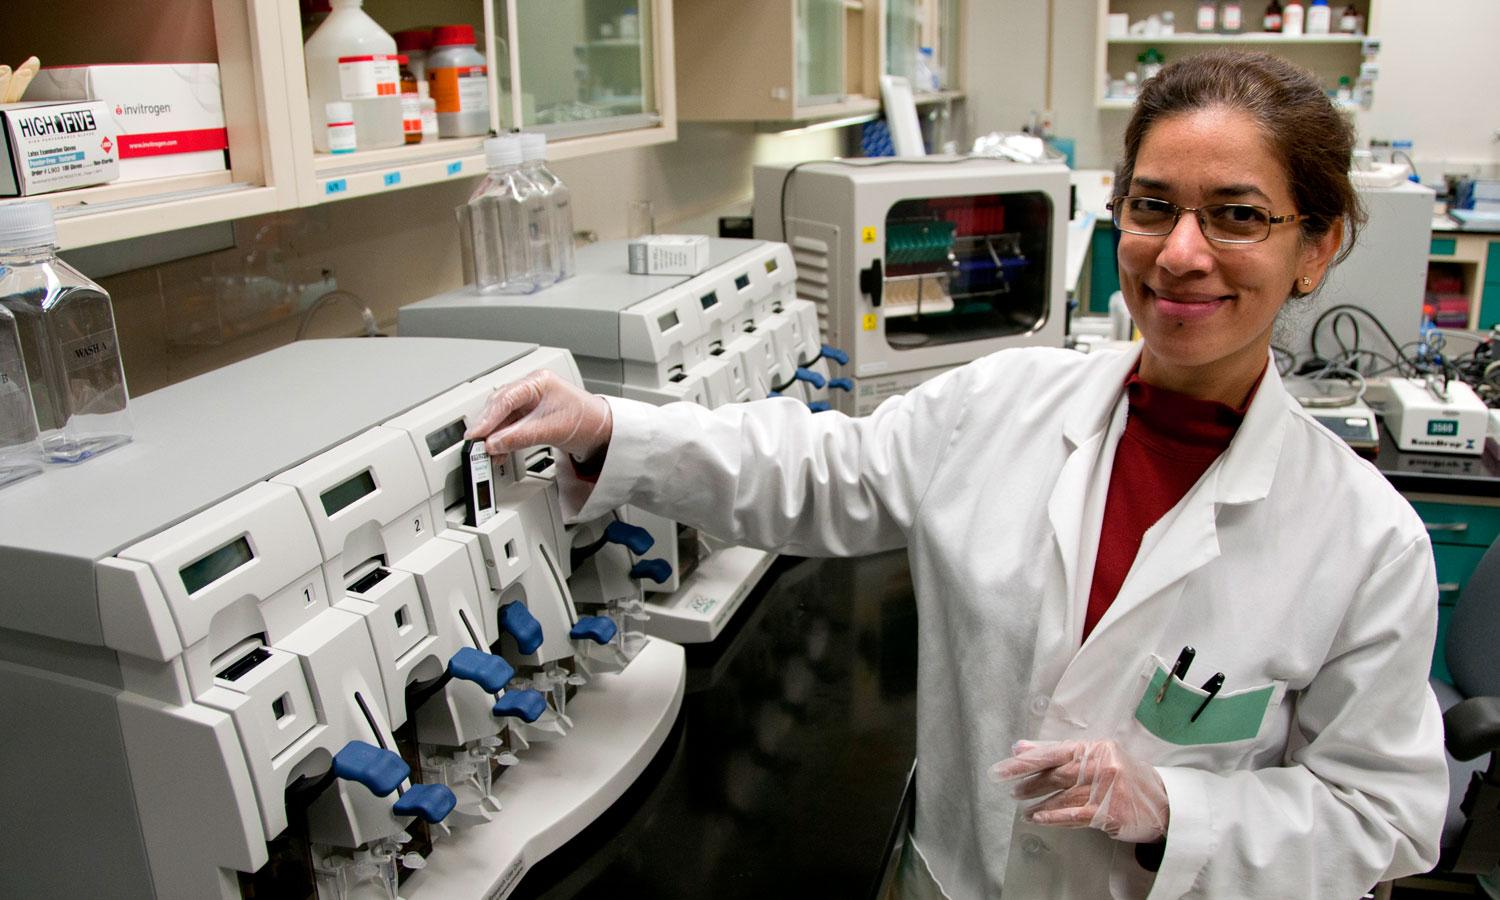 National Center for Toxicological Research scientist processing a microarray to measure and assess the level of genes found in a tissue sample